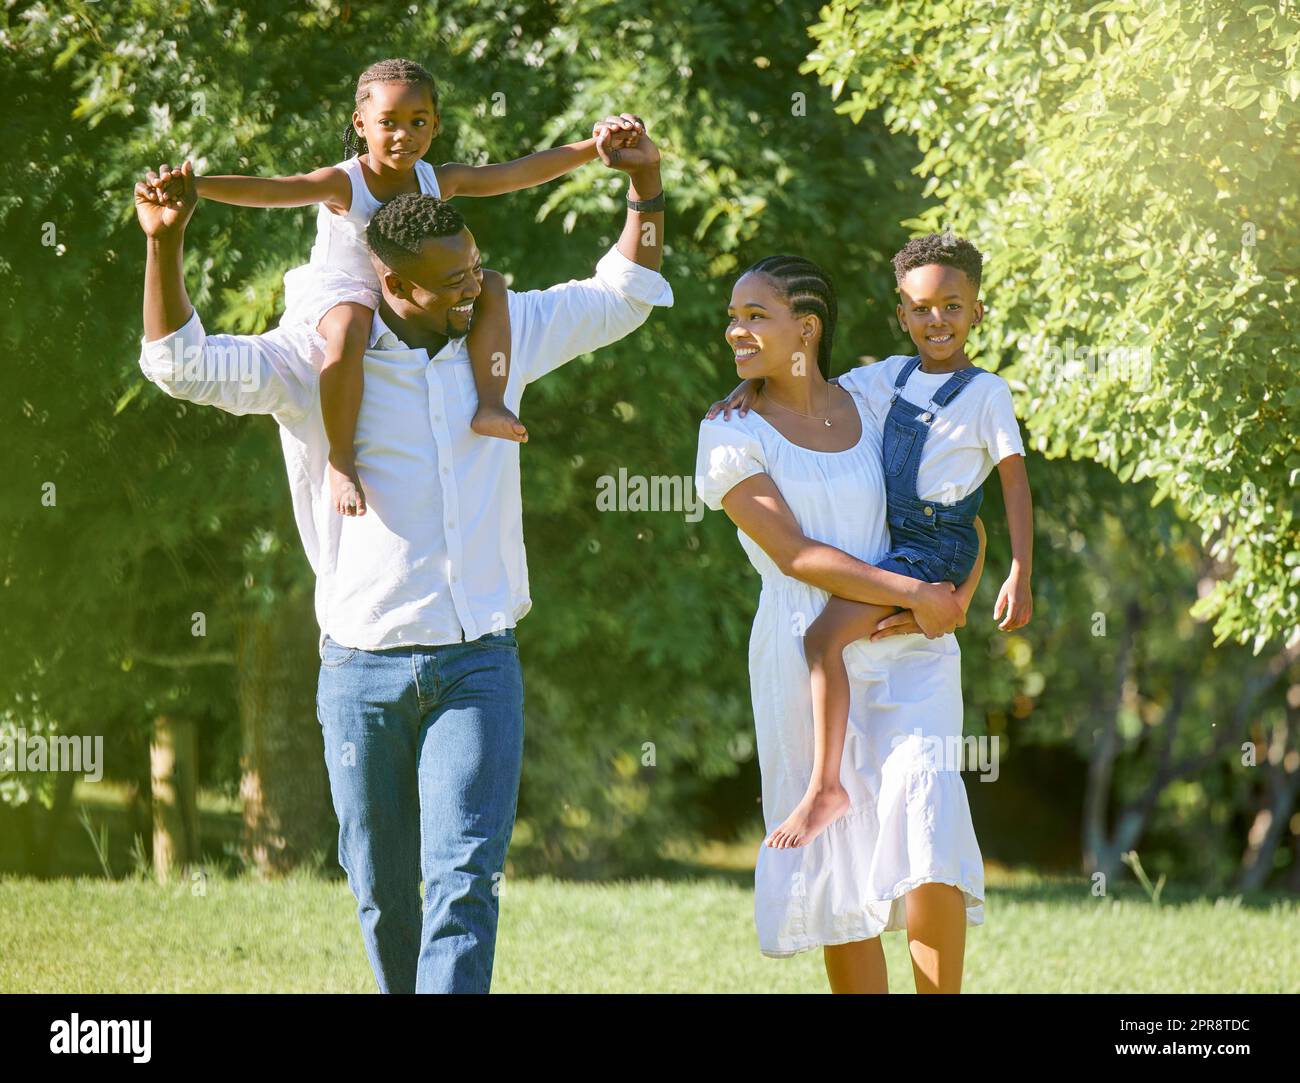 Loving them comes naturally. a couple spending time outdoors with their two children. Stock Photo